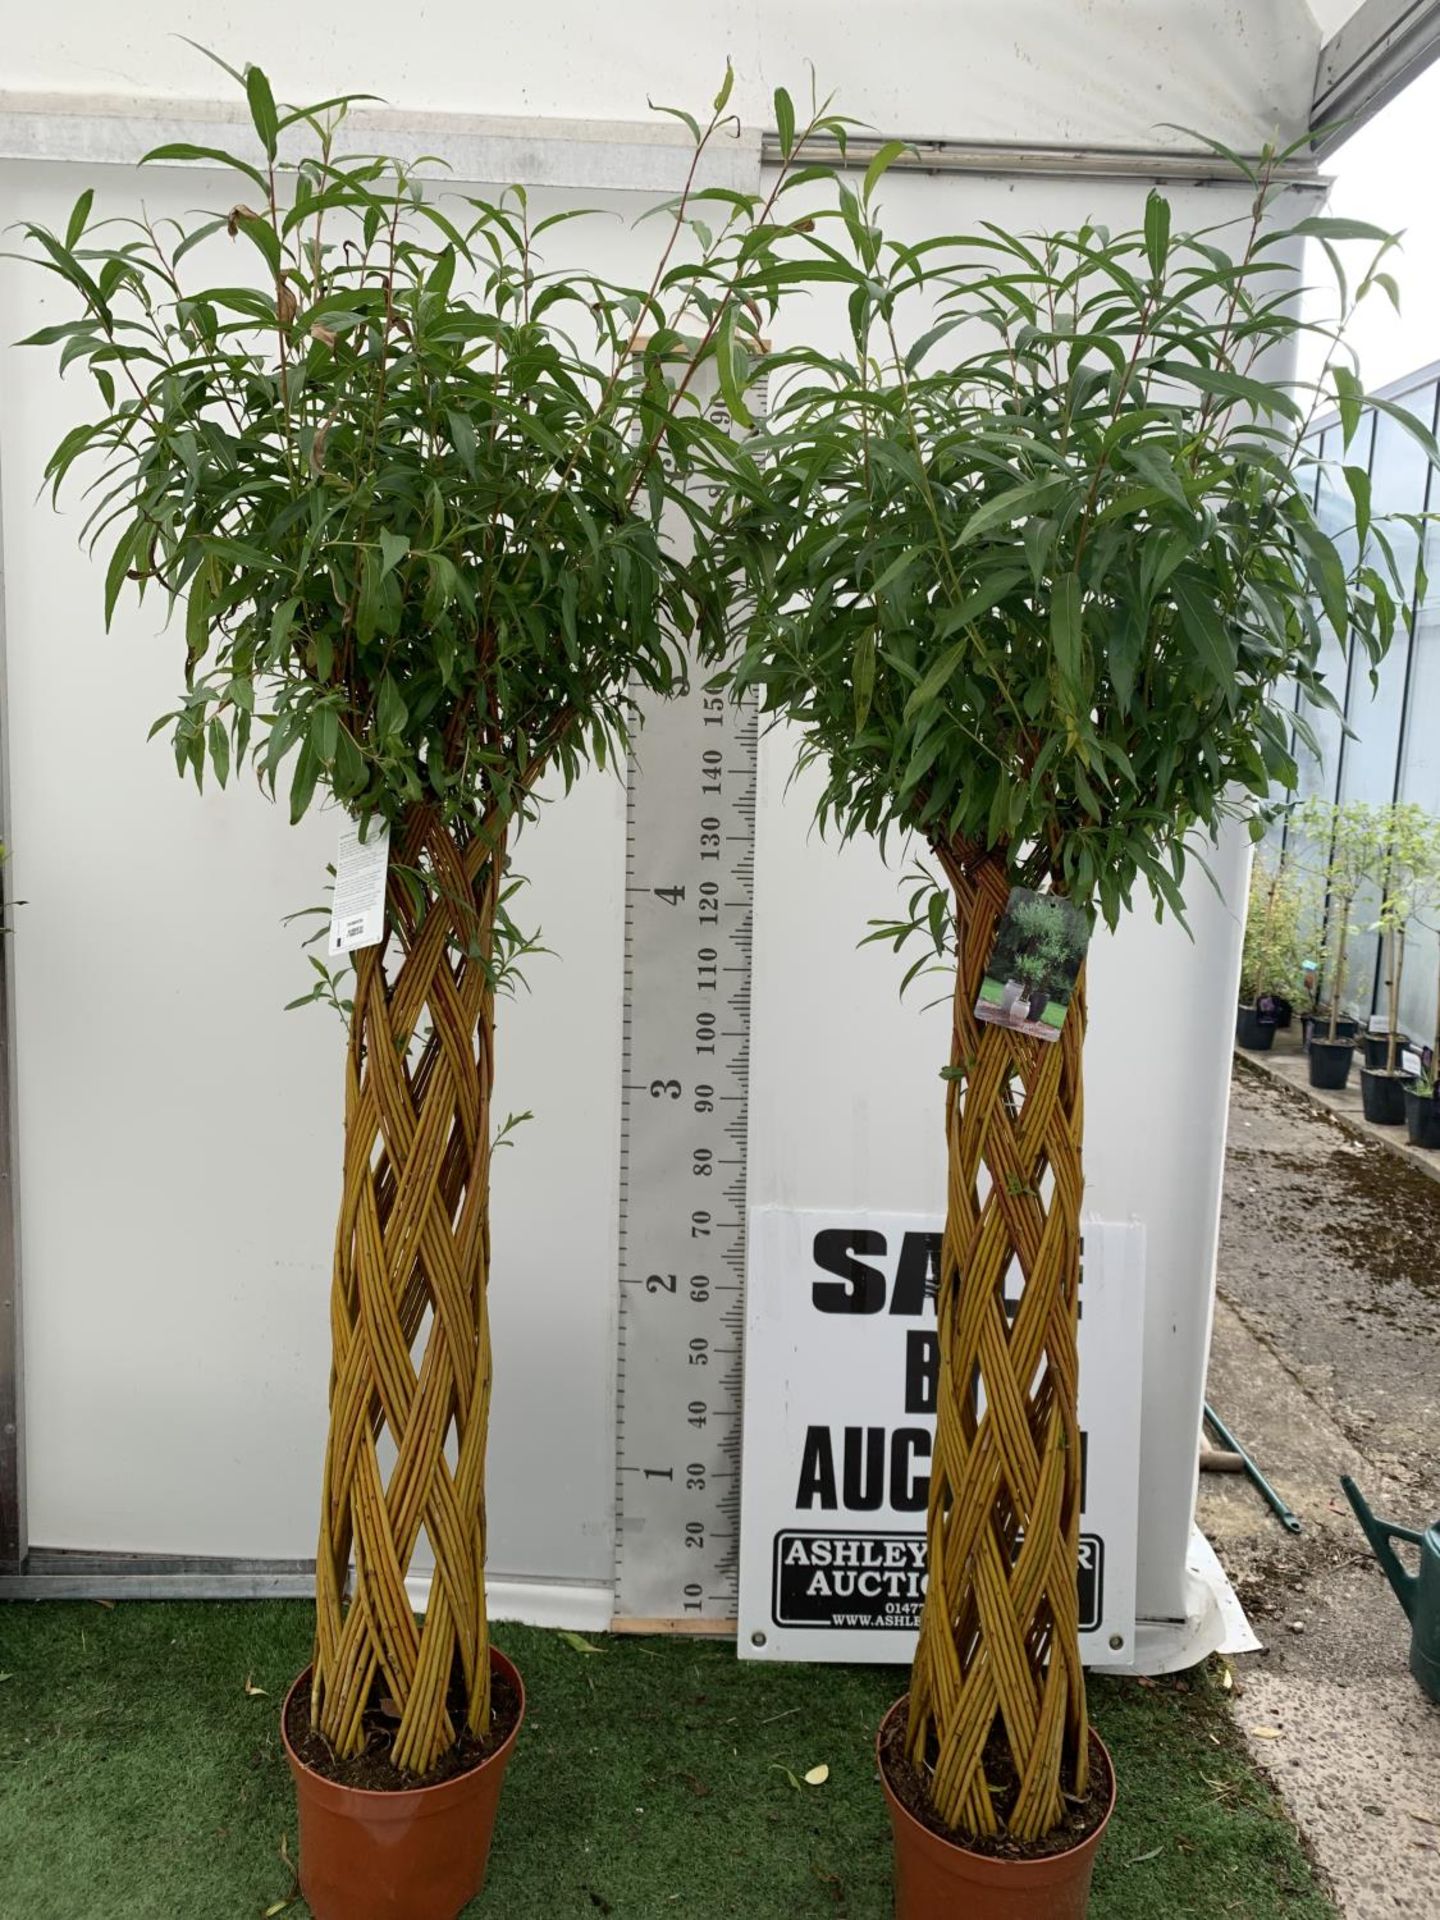 TWO SALIX LIVING WILLOW TREES IN 7.5 LTR POTS OVER 2 METRES IN HEIGHT TO BE SOLD FOR THE TWO PLUS - Image 3 of 22